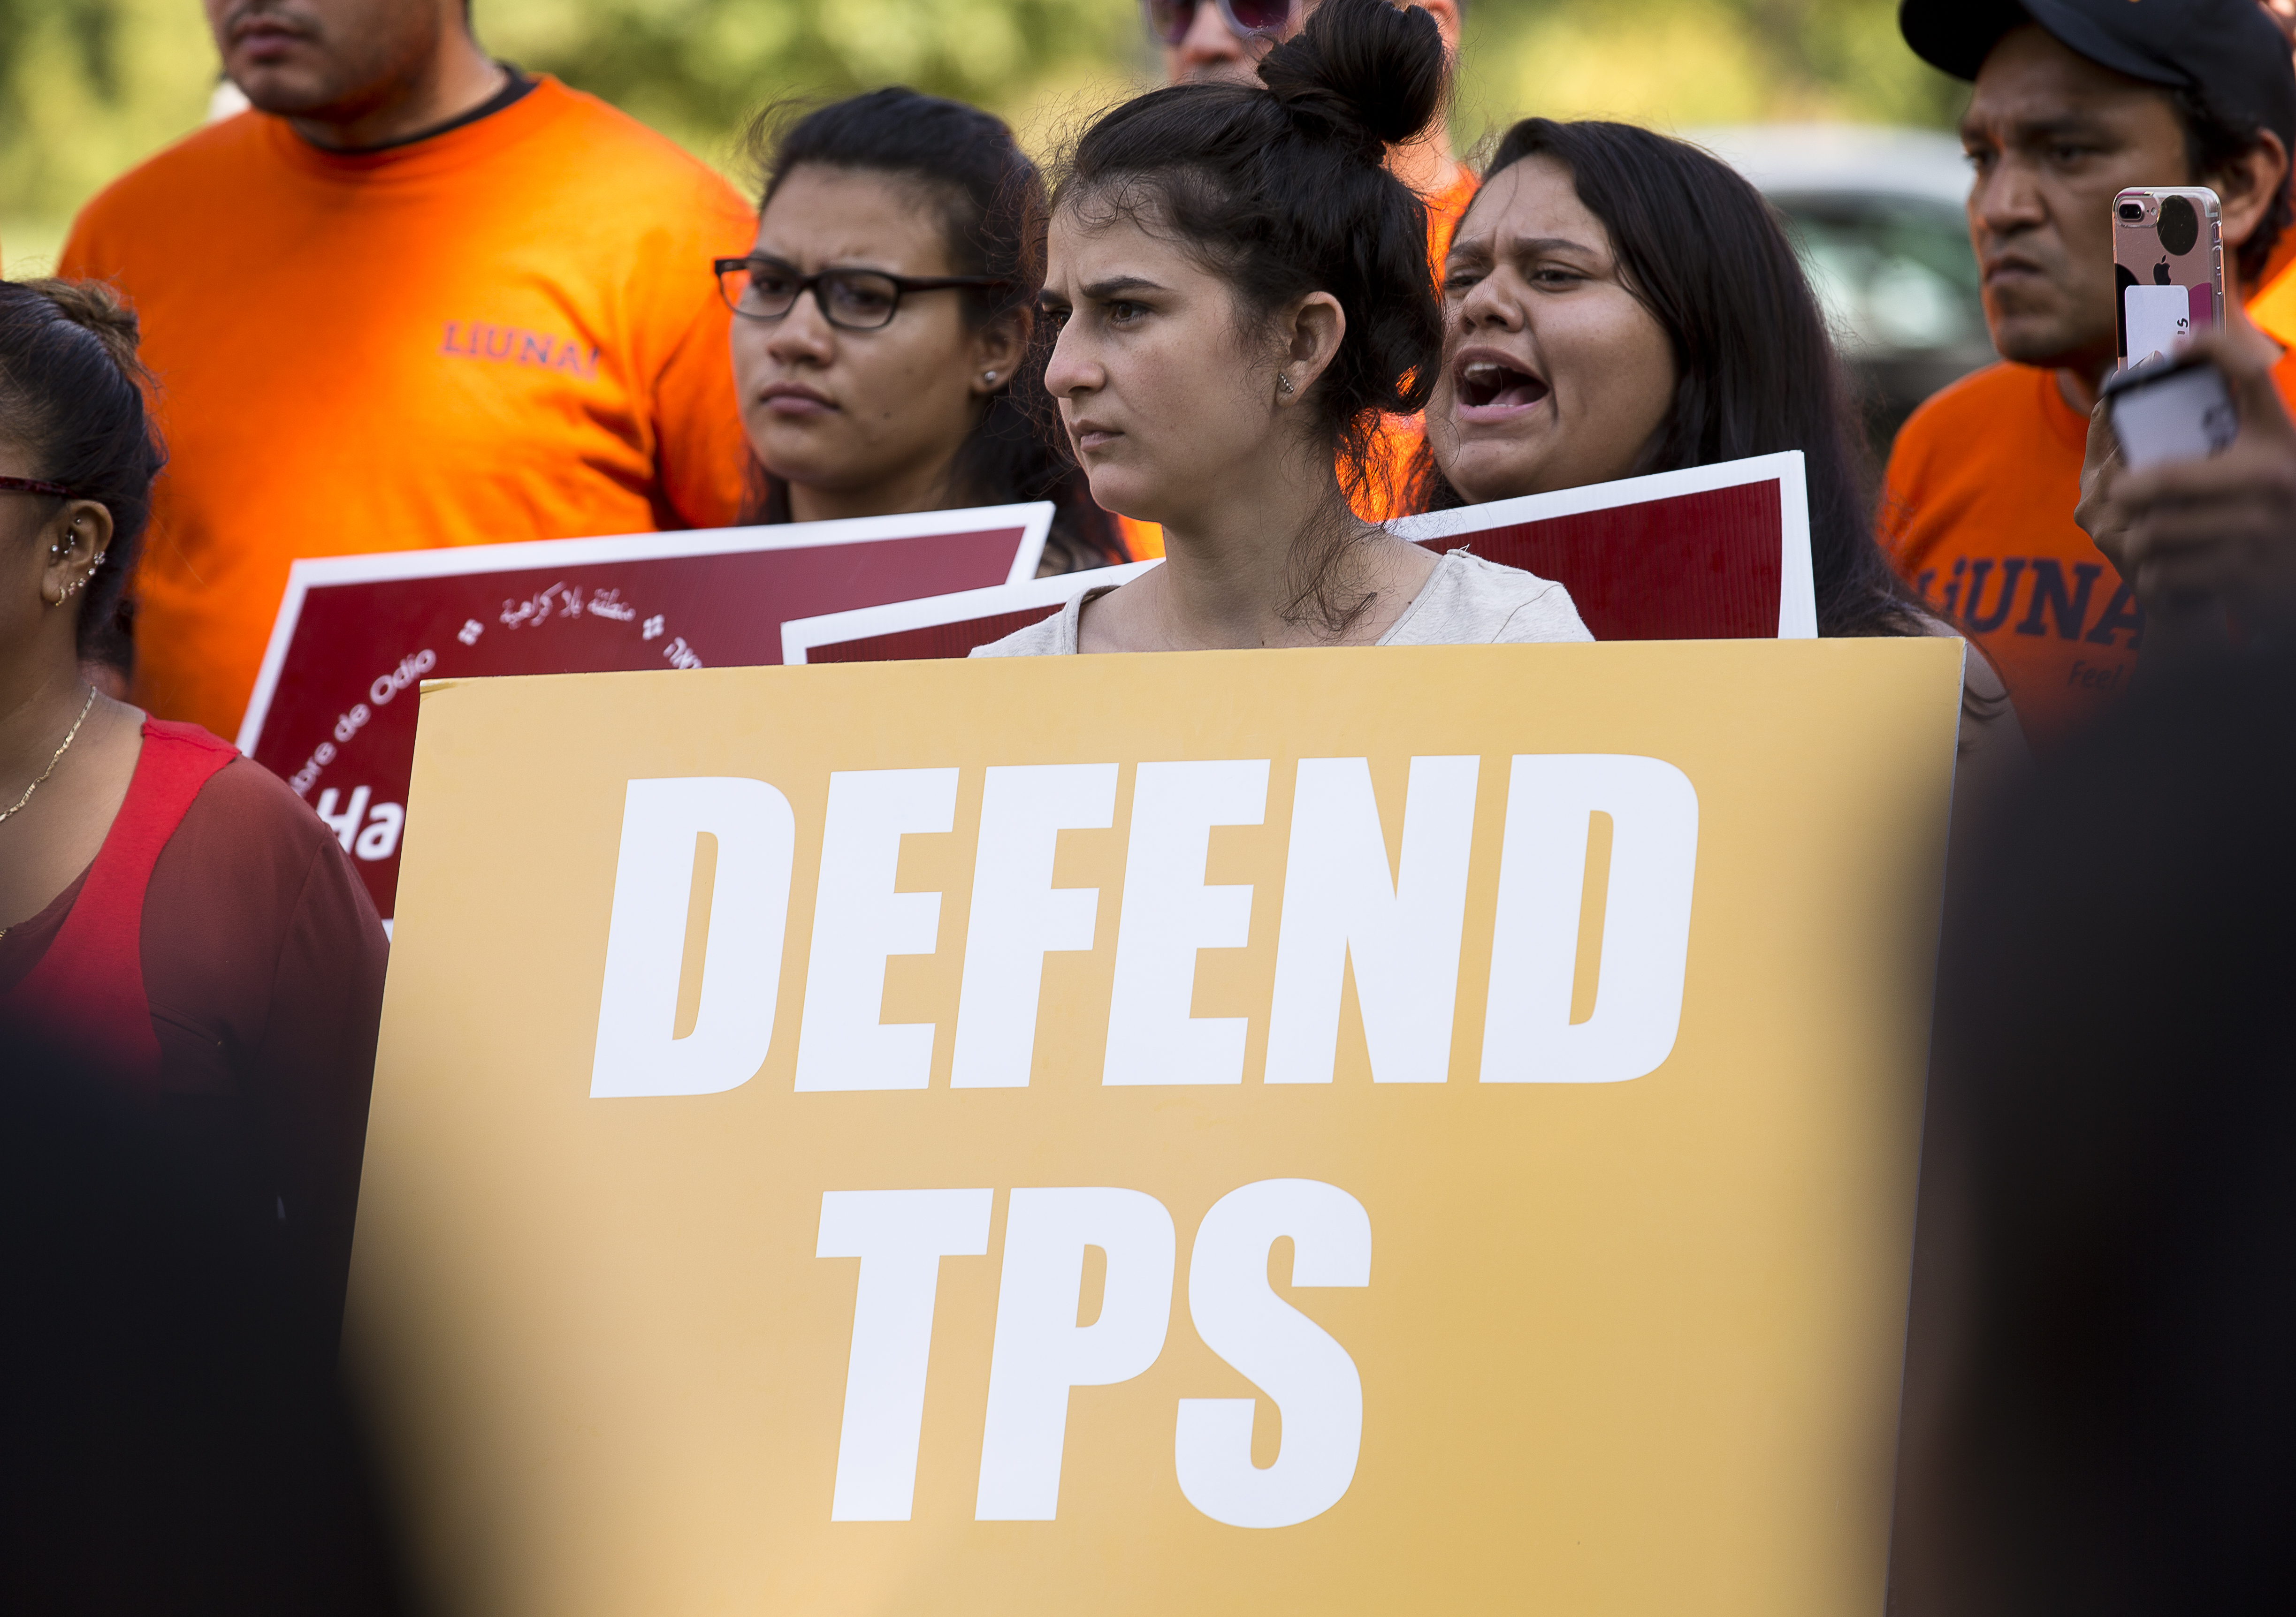 A woman holds a sign showing her support for Temporary Protected Status, or TPS, during a 2017 rally near the U.S. Capitol in Washington. (CNS photo/Tyler Orsburn) See TPS-BISHOP-CHILDREN Jan. 4, 2018.